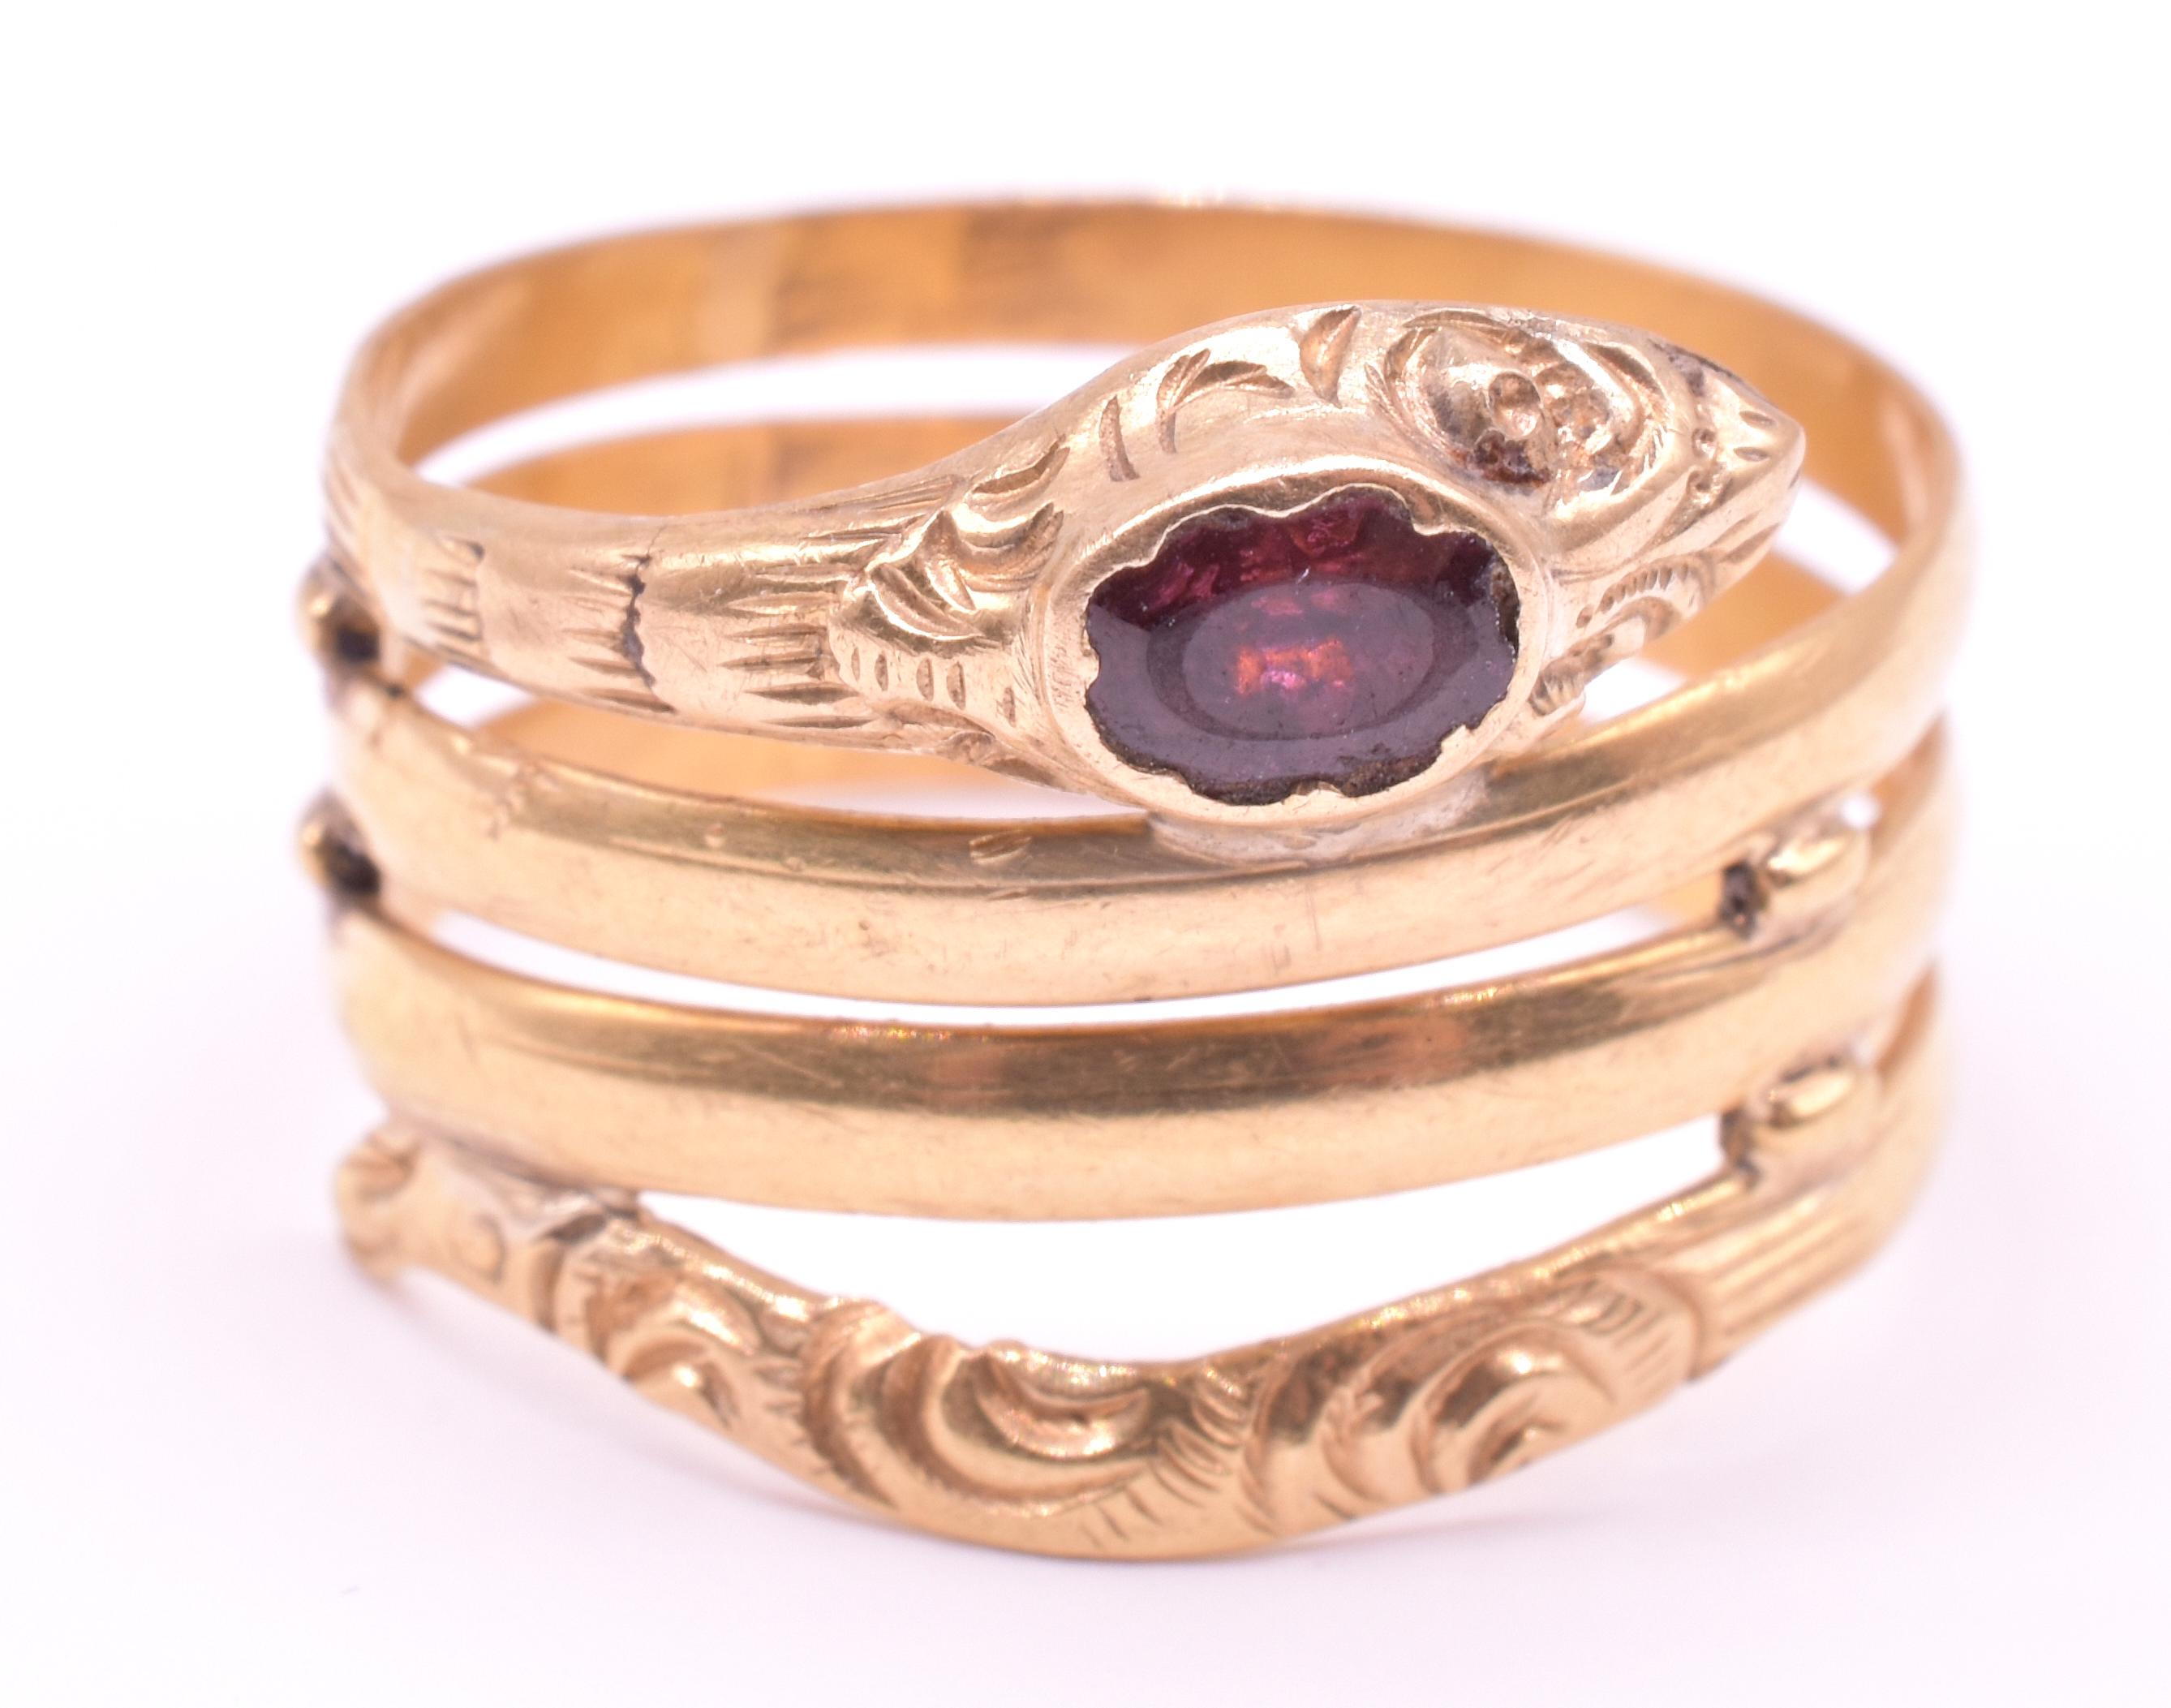 Beautifully engraved wide 18K gold snake ring with a garnet topped head makes a wonderful statement. Snake rings represent eternal love.  They became popular in England after Queen Victoria received one as her engagement ring.   This snake ring,  